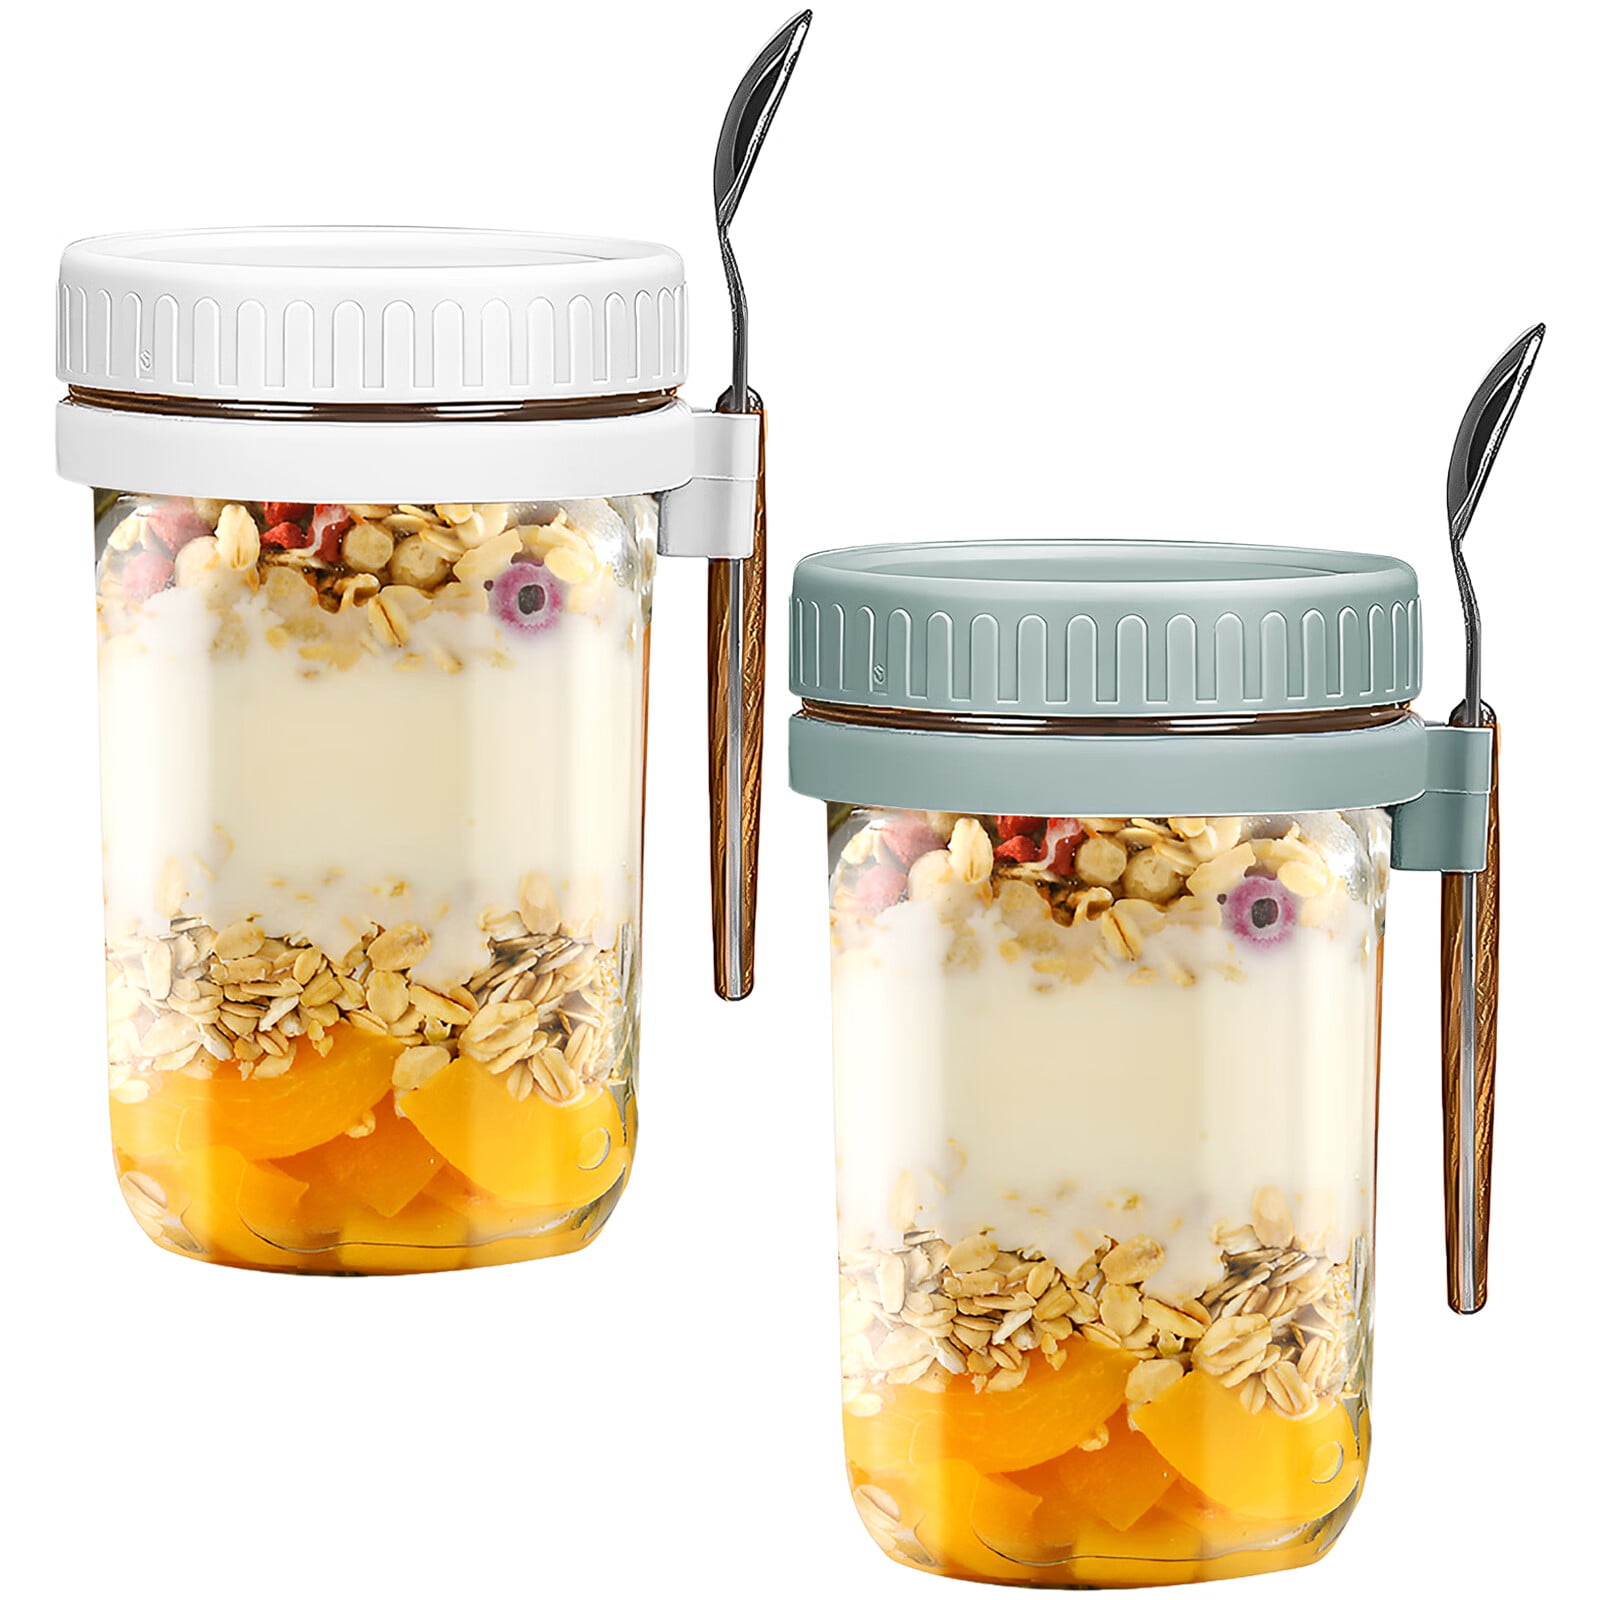  Tribello 20 OZ Overnight Oats Container With Lid, Set of 4  Crunch Cups To Go, Portable Parfait Cup With Compartments for Topping  Cereal Or Oatmeal - Colorful: Home & Kitchen